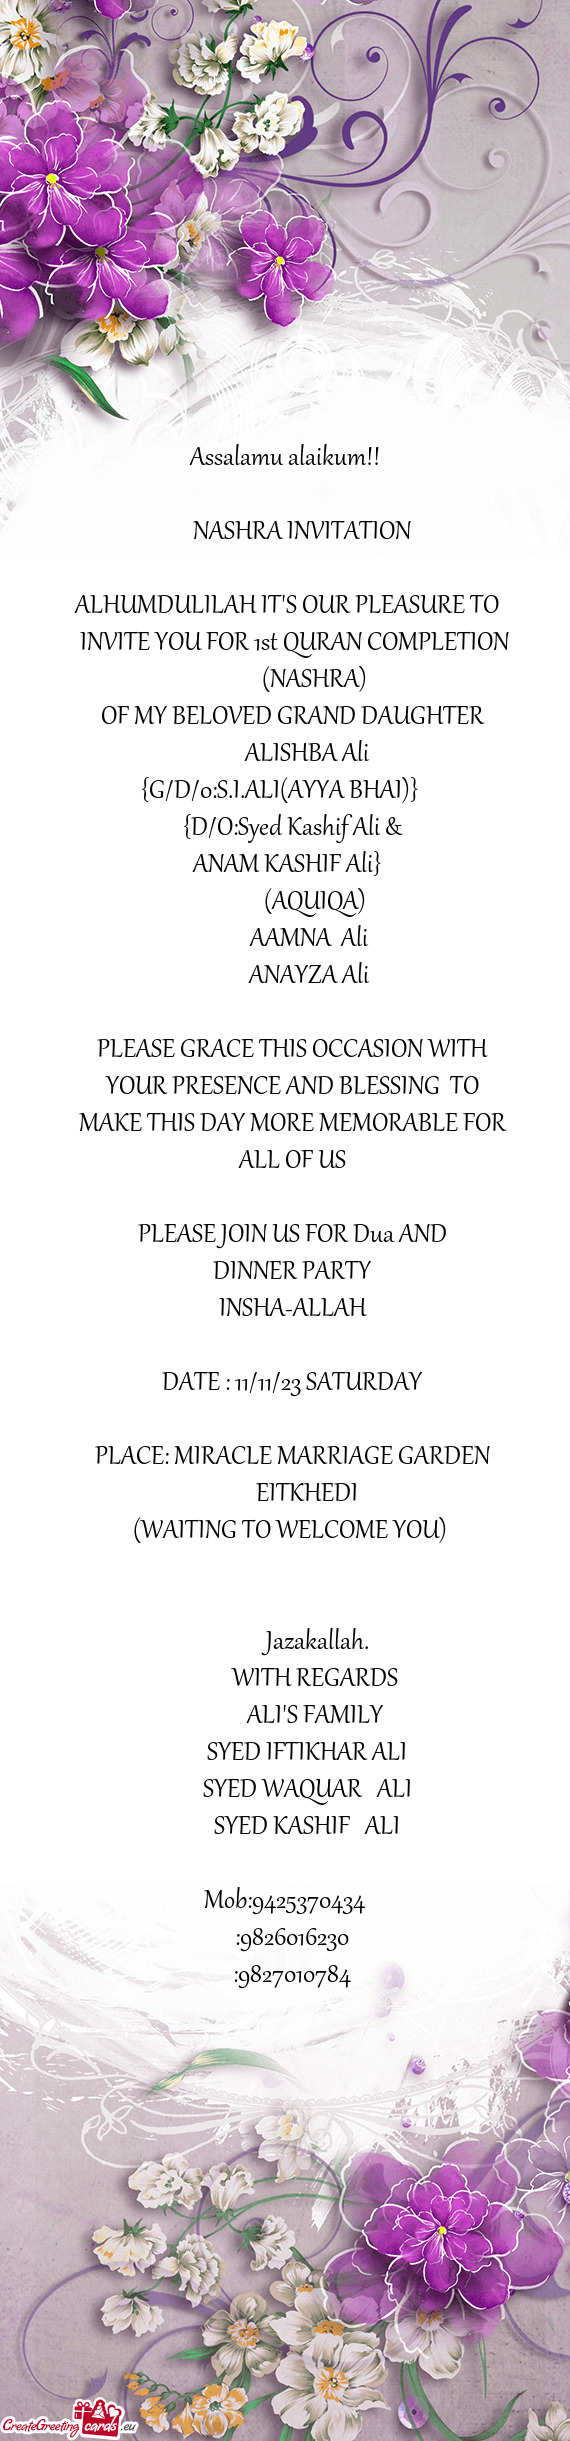 INVITE YOU FOR 1st QURAN COMPLETION